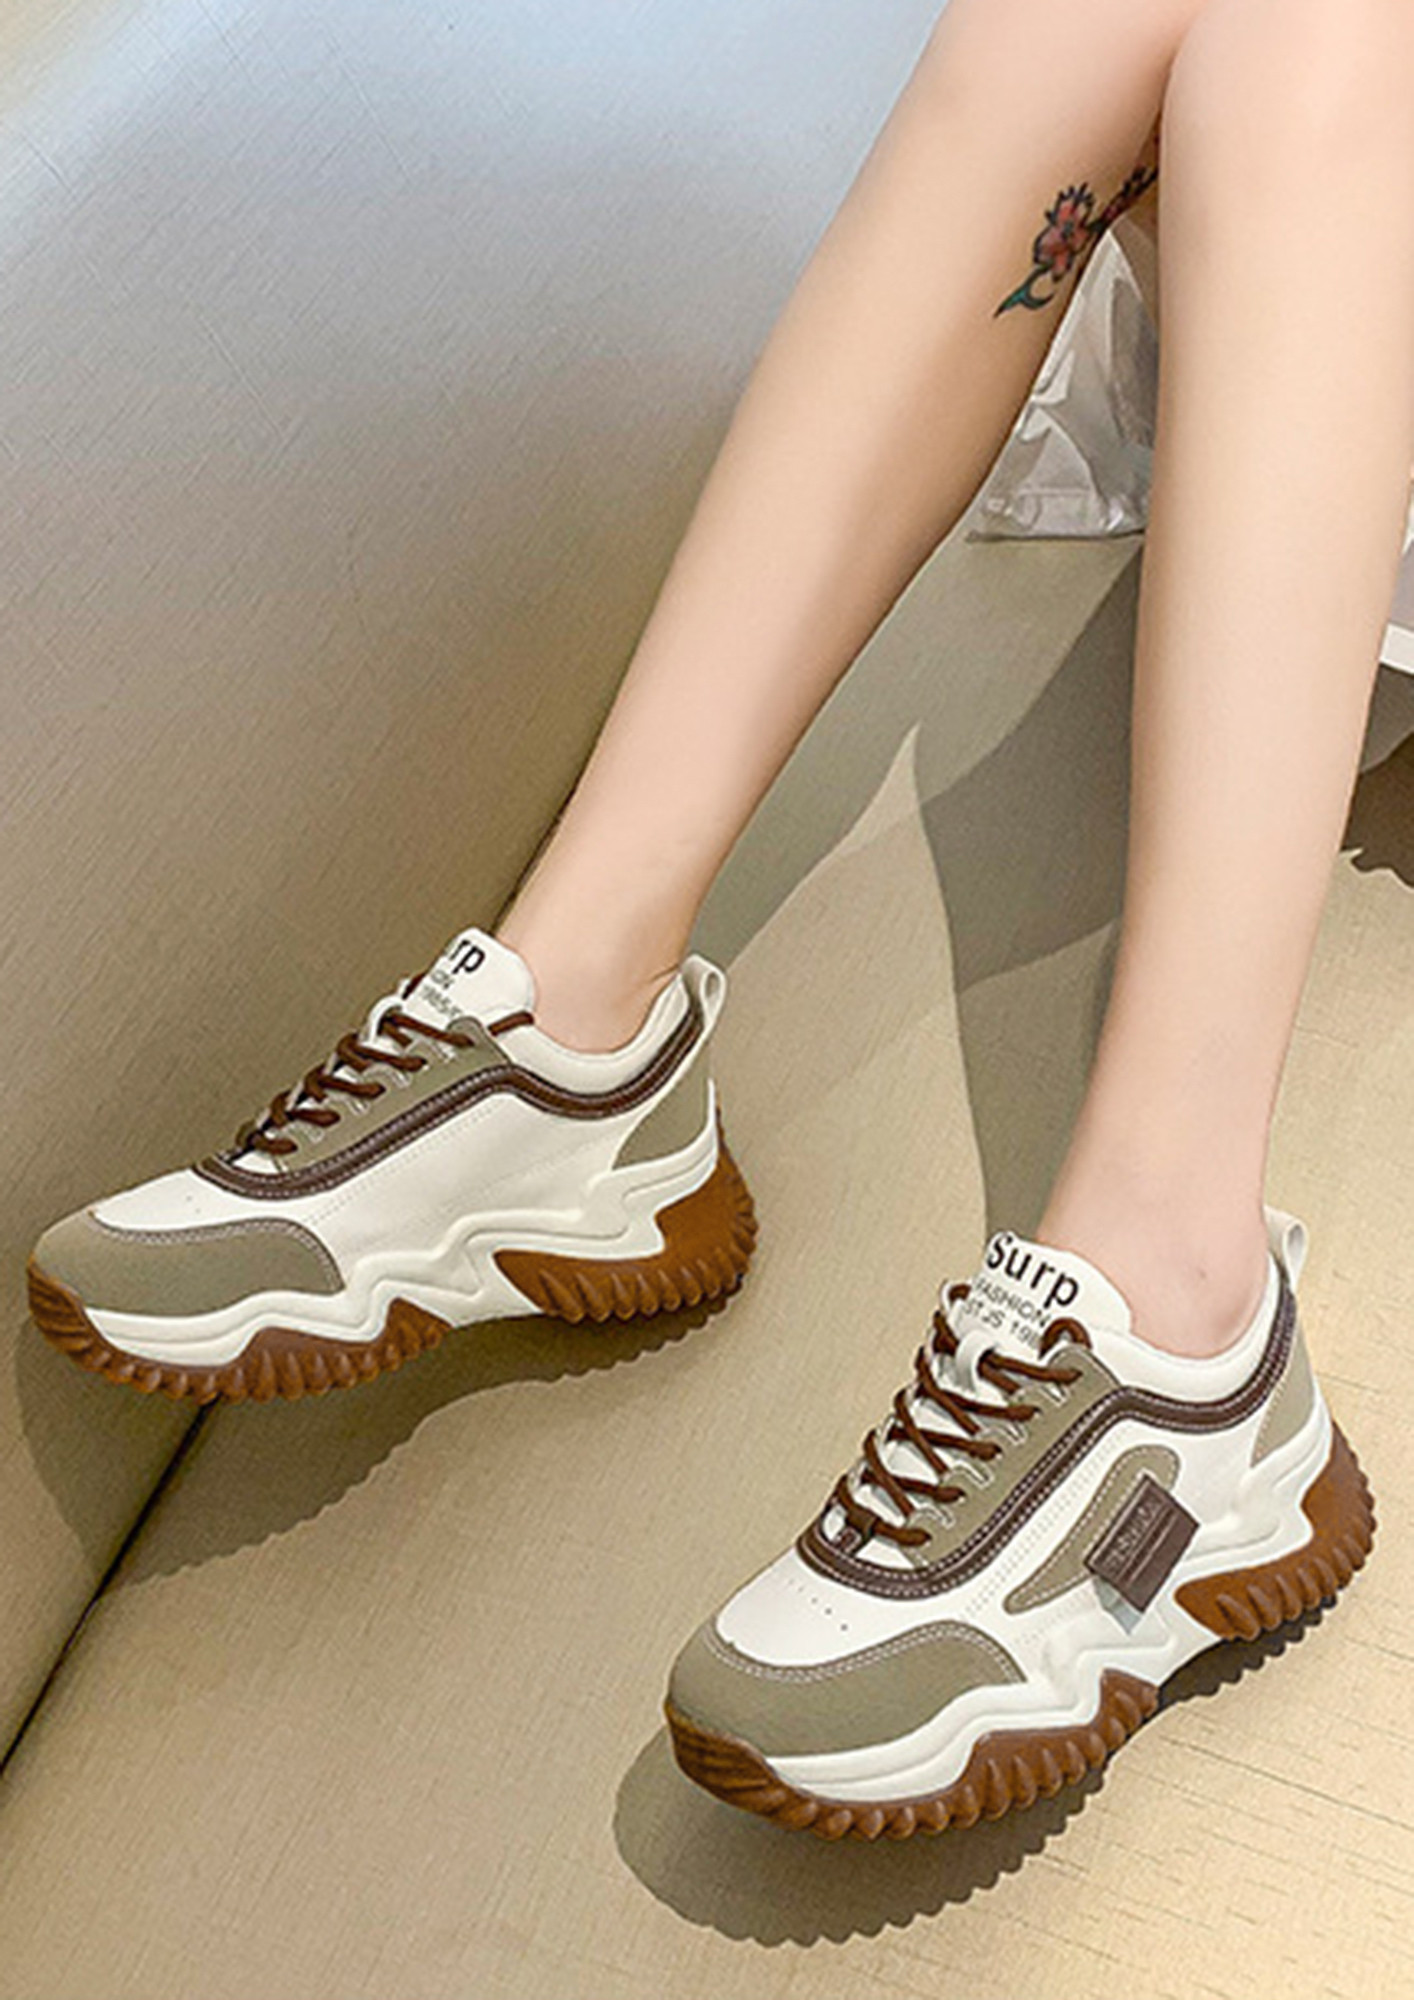 Buy Sneakers For Women: Raise-Hny-Skl-Holidy | Campus Shoes